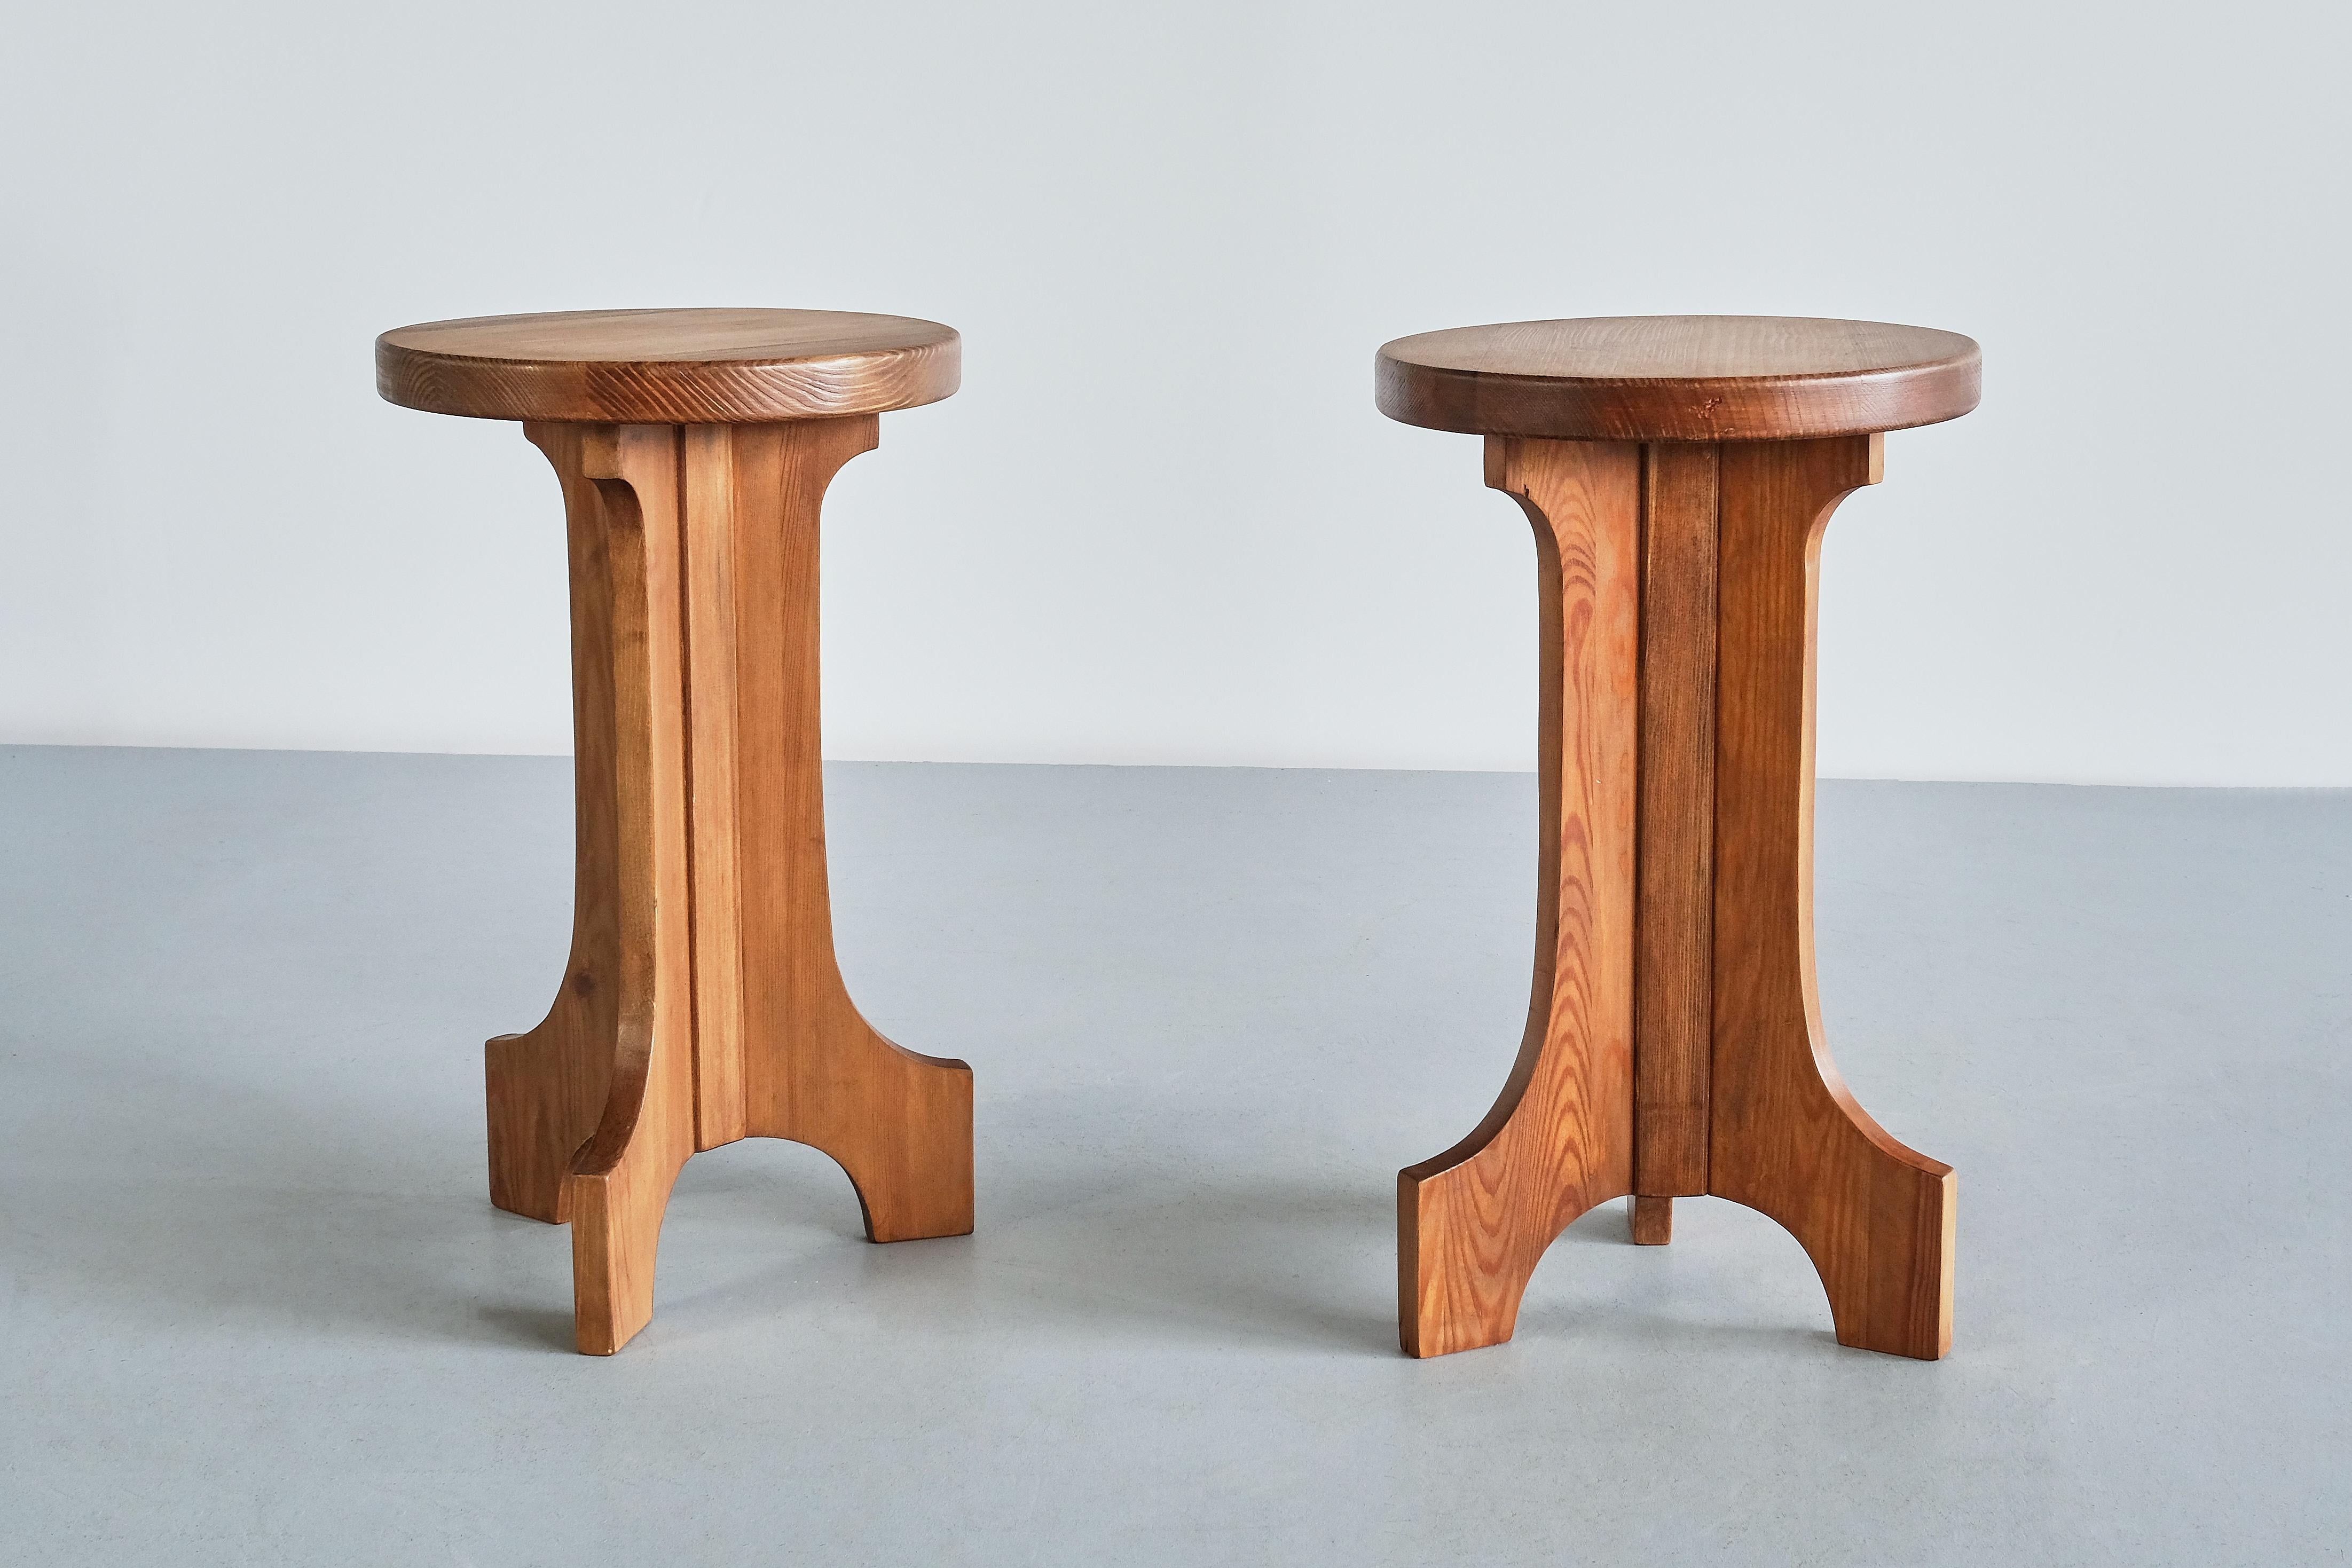 This rare pair of stools/ side tables was produced by Nordiska Kompaniet in Sweden in the 1940s. The tables are made of solid pine wood with a natural and beautiful patina acquired over time. The design is marked by the three-legged pedestal base